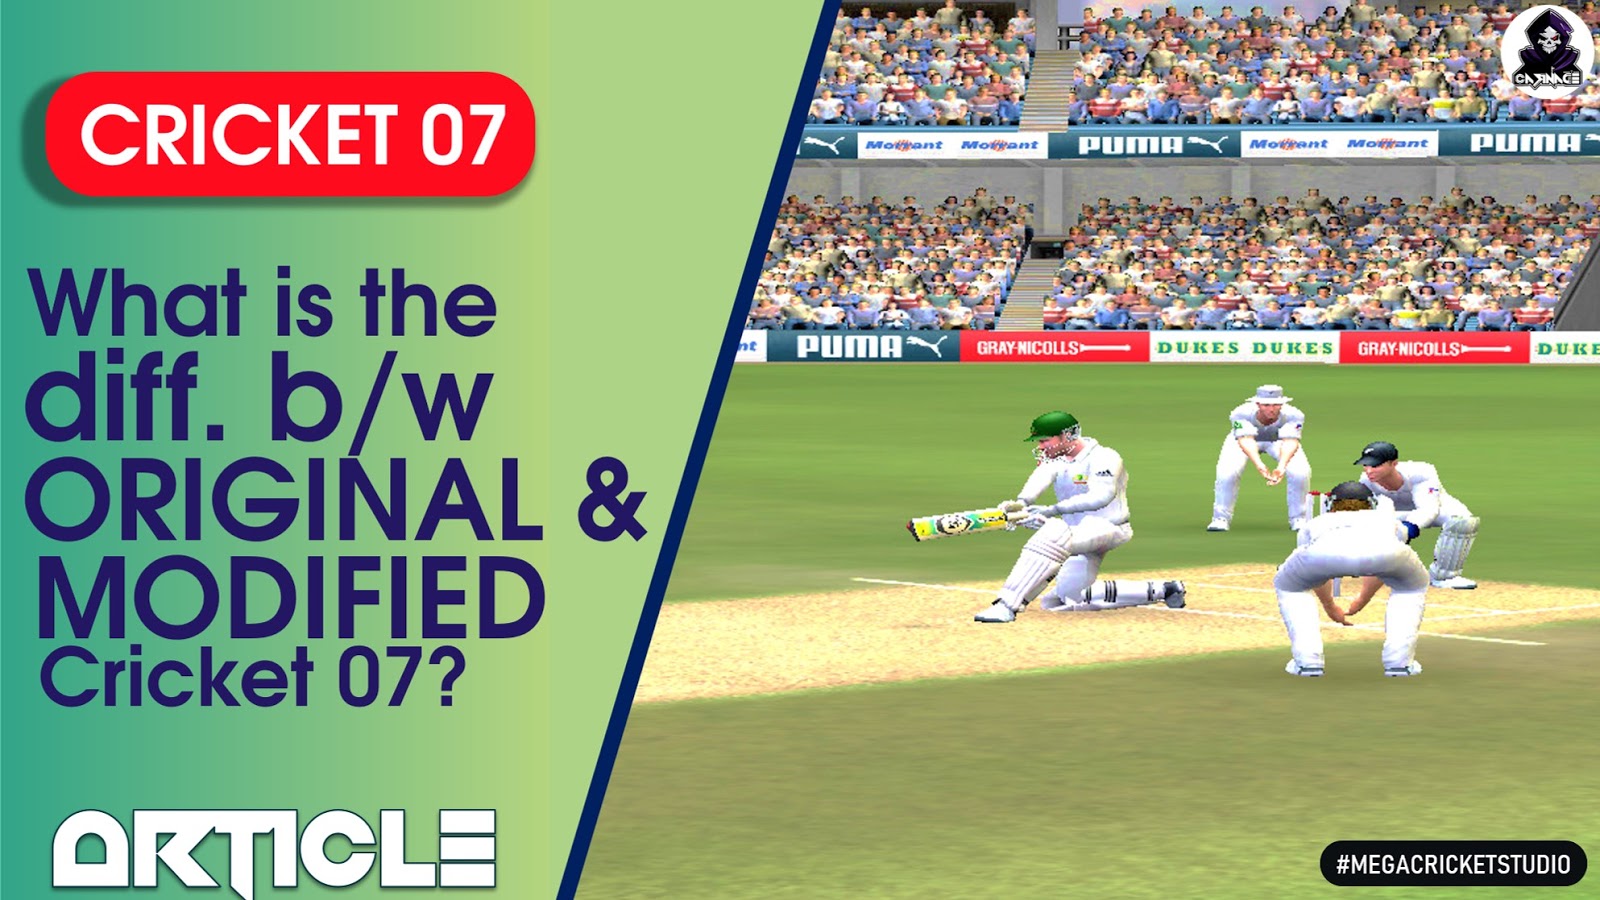 What is difference between Original and Modified Cricket 07?